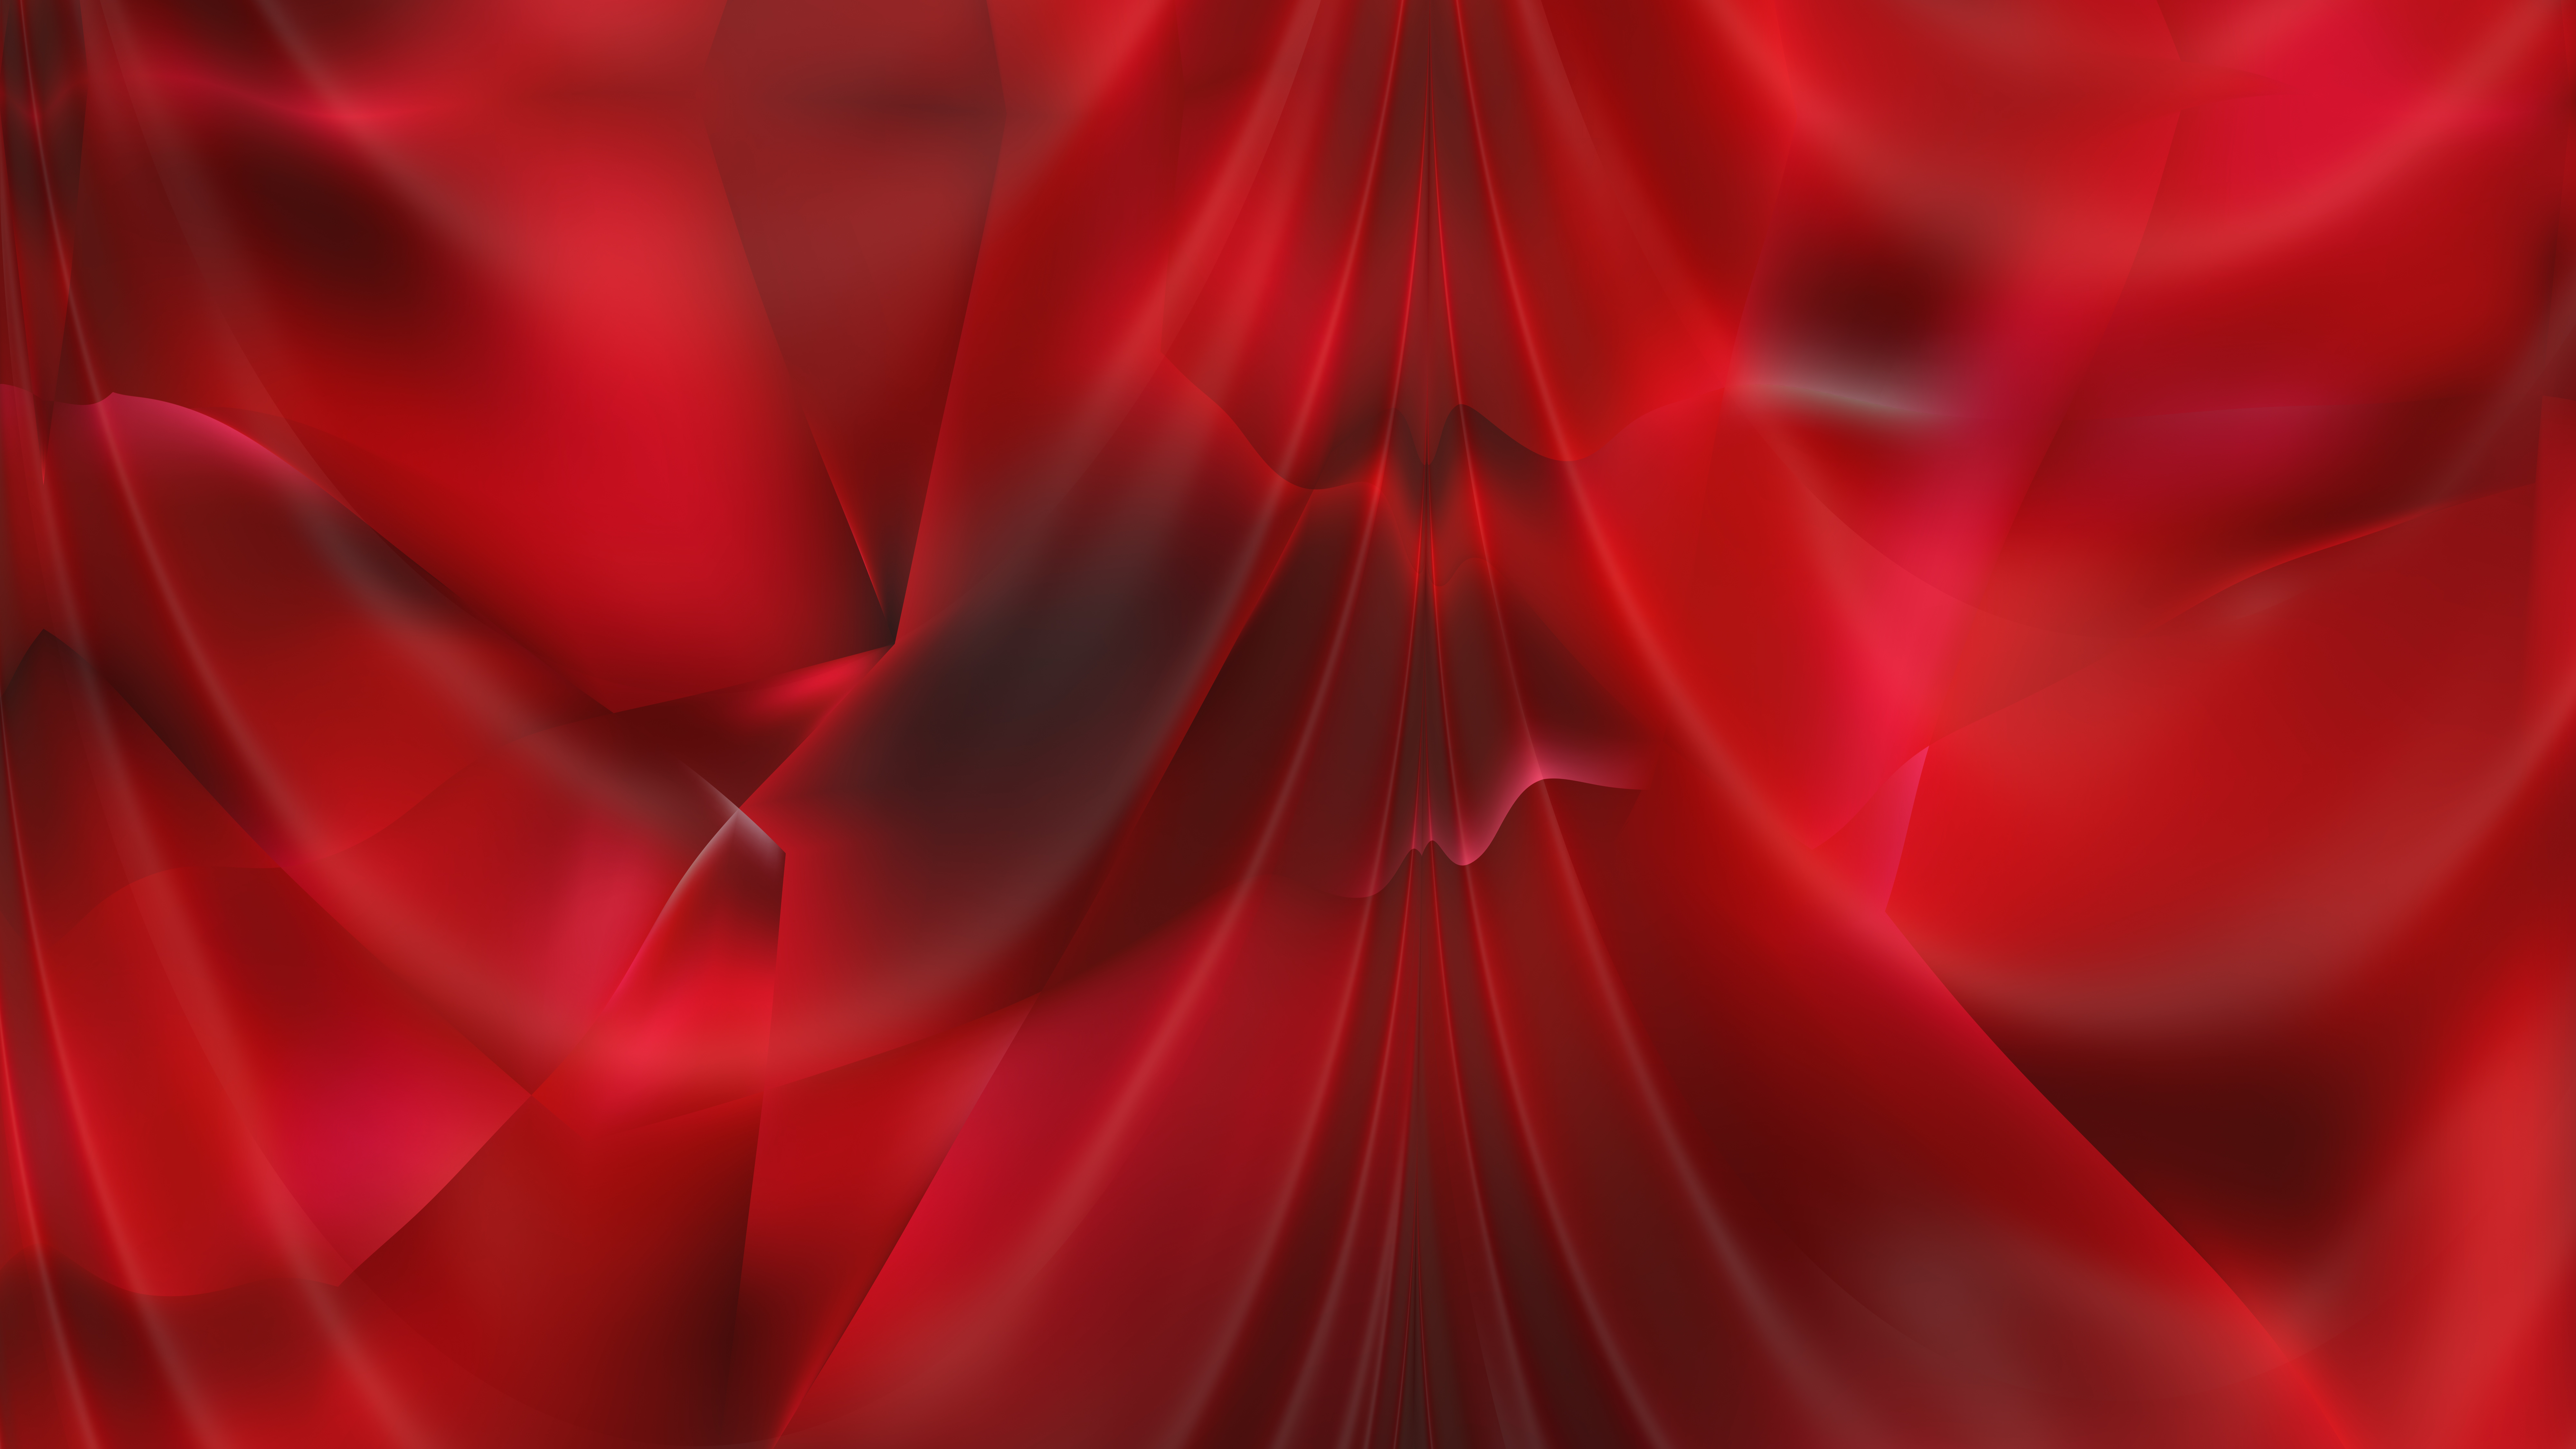 Free Dark Red Abstract Texture Background Image